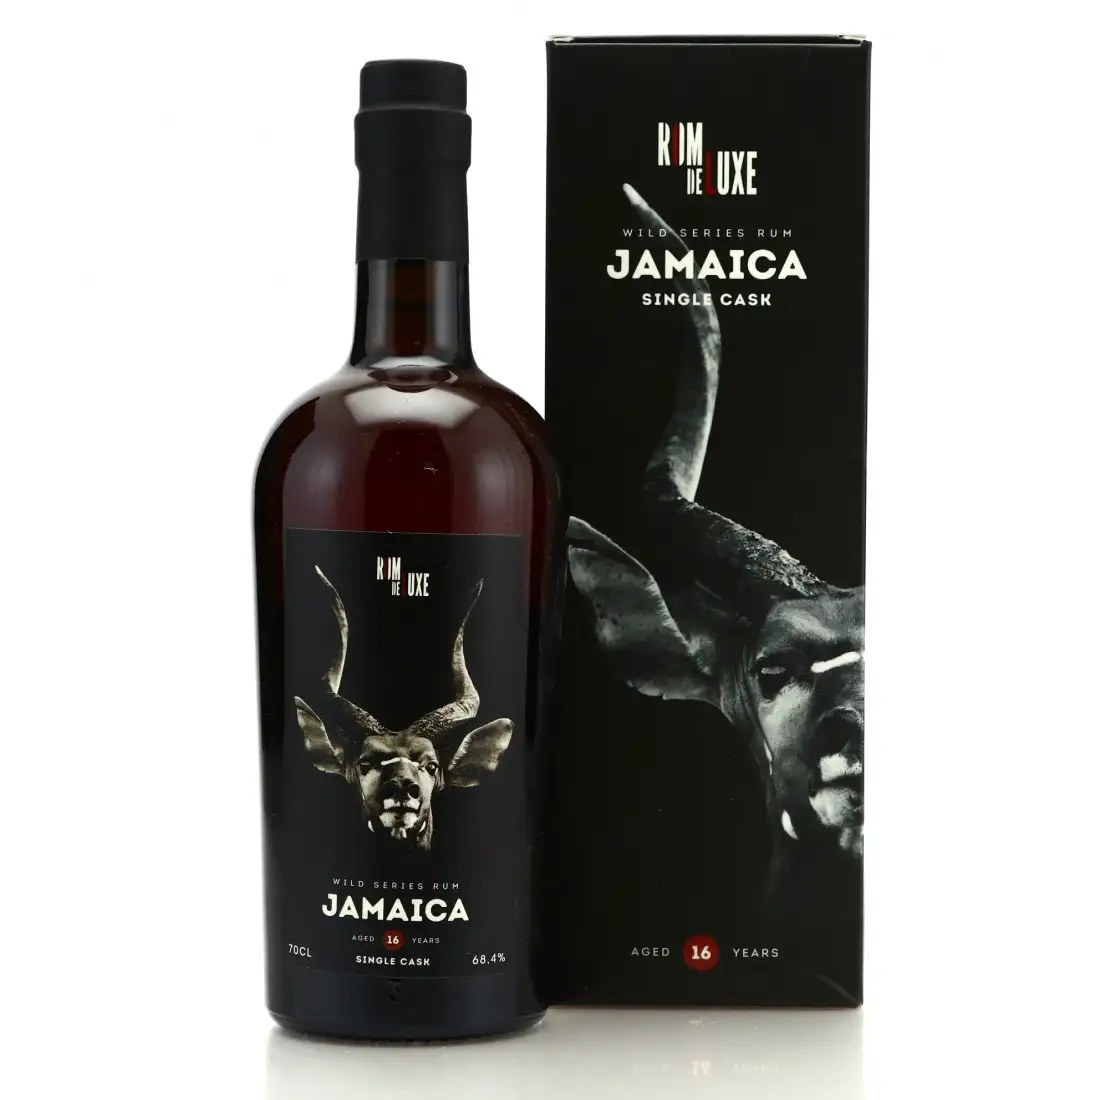 Image of the front of the bottle of the rum Wild Series Rum Jamaica No. 26 VRW